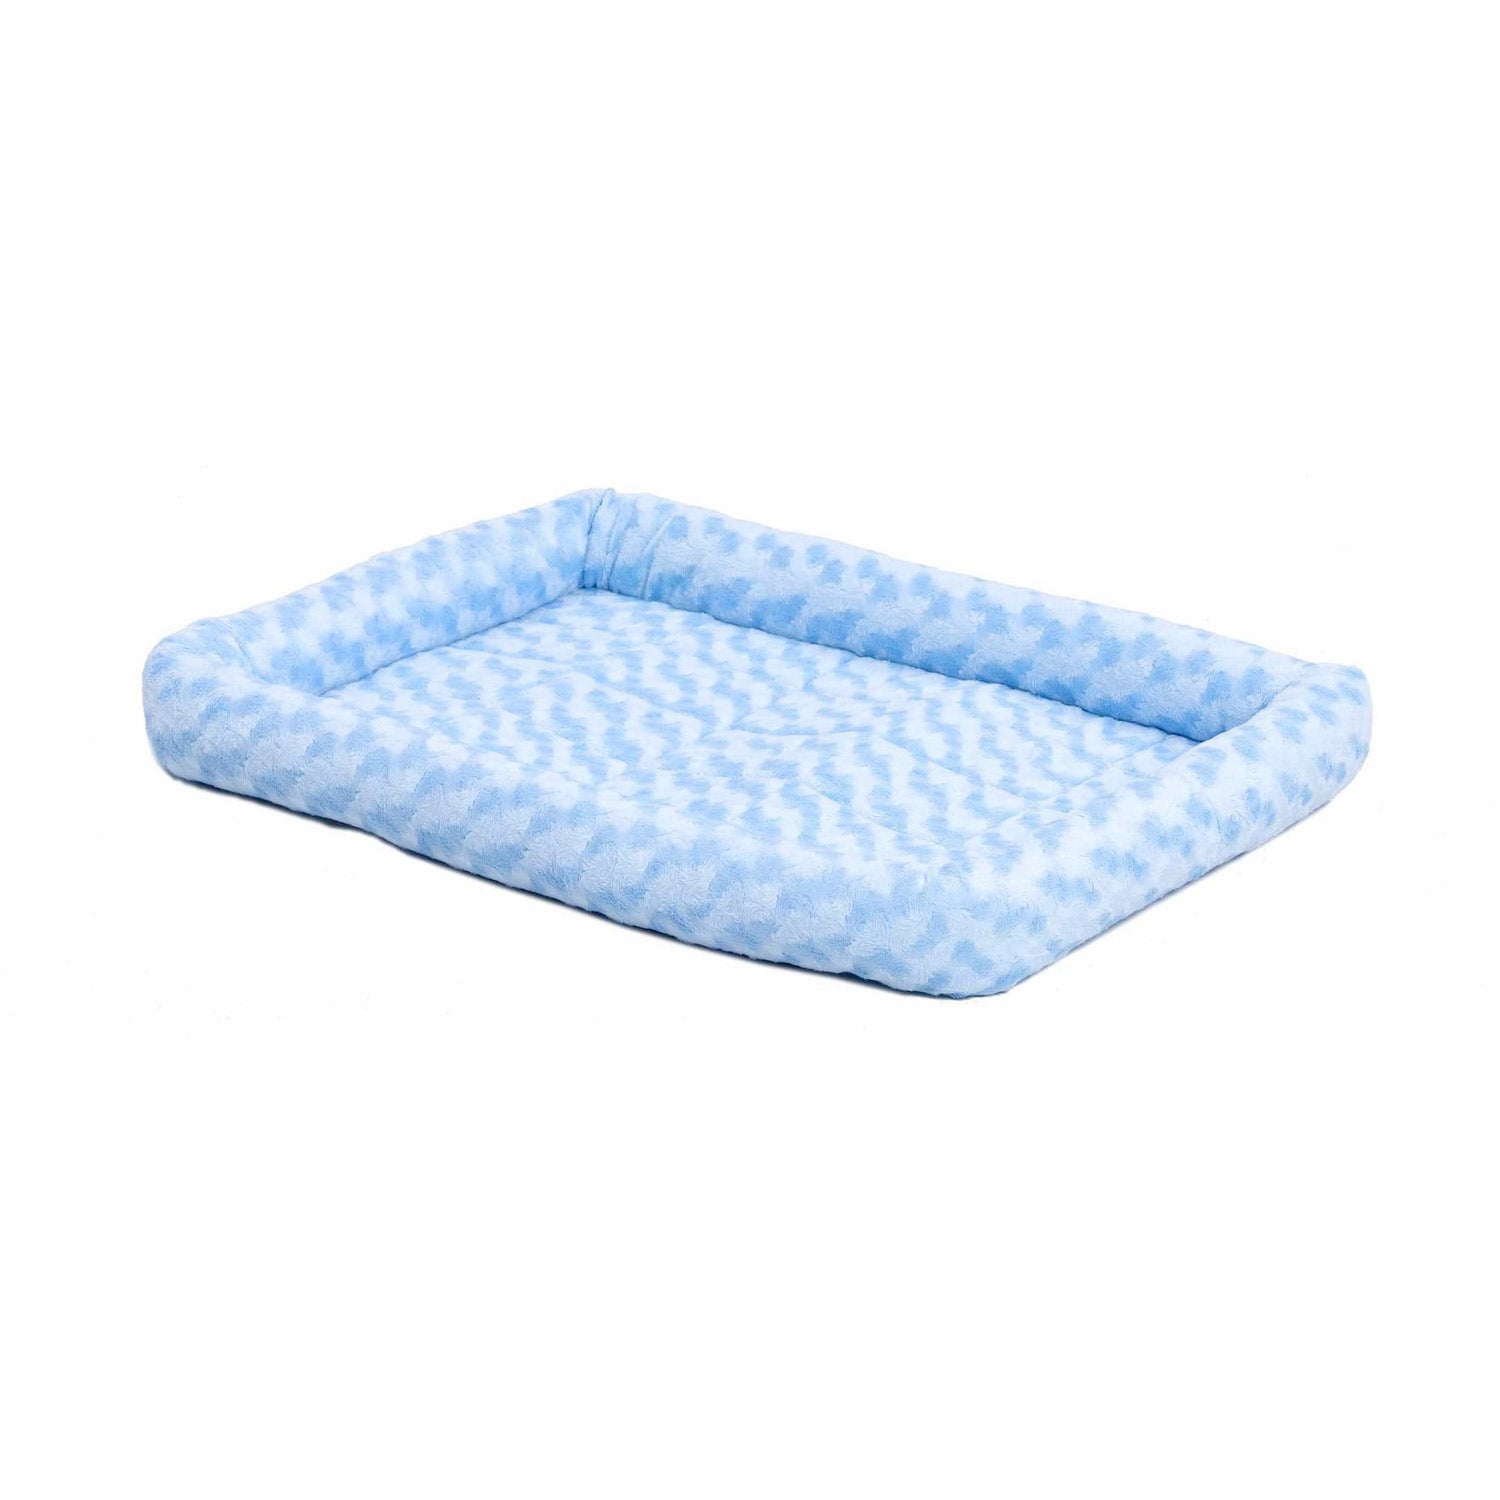 MIDWEST QuietTime Deluxe Powder Blue Bolster Bed 30"